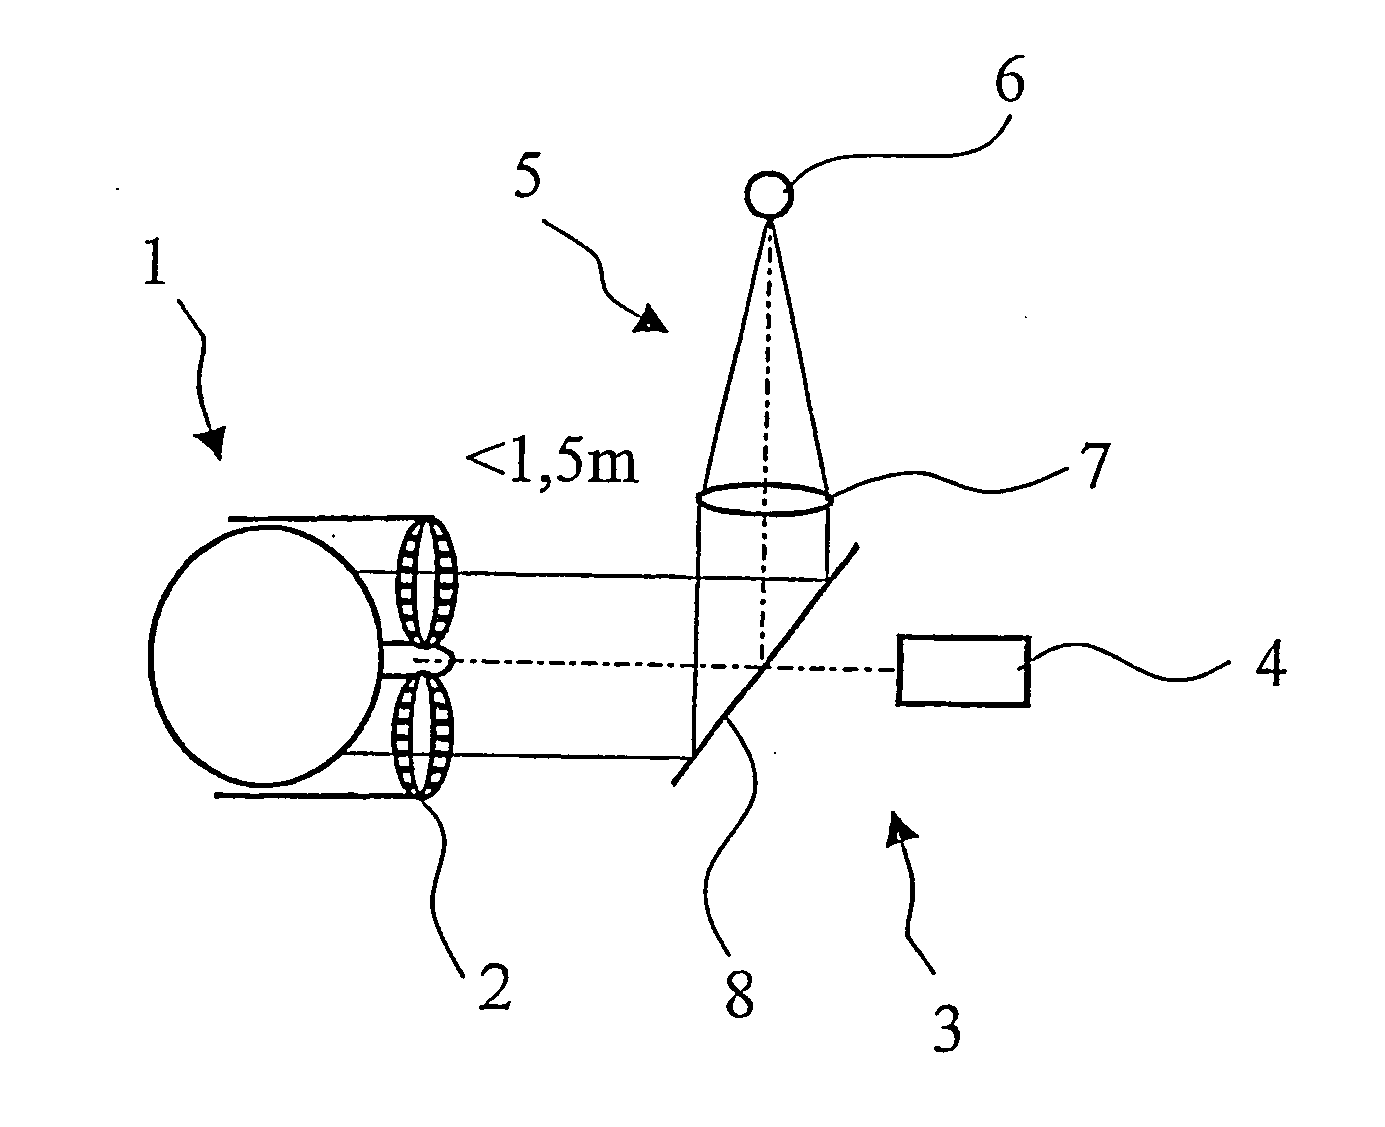 Apparatus and method for determining centering data for spectacles